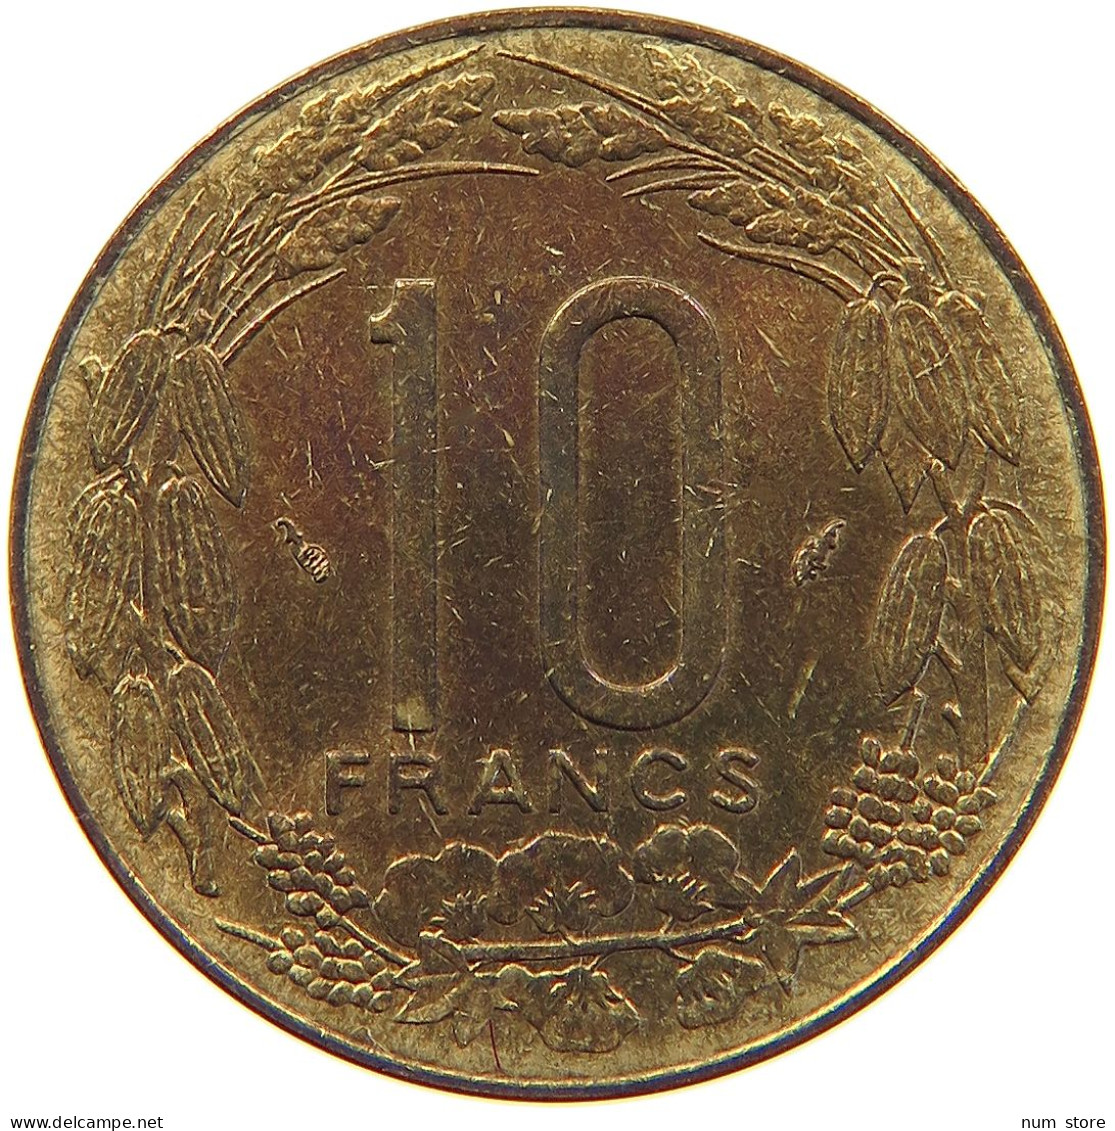 CENTRAL AFRICAN STATES 10 FRANCS 1985  #MA 065266 - Central African Republic